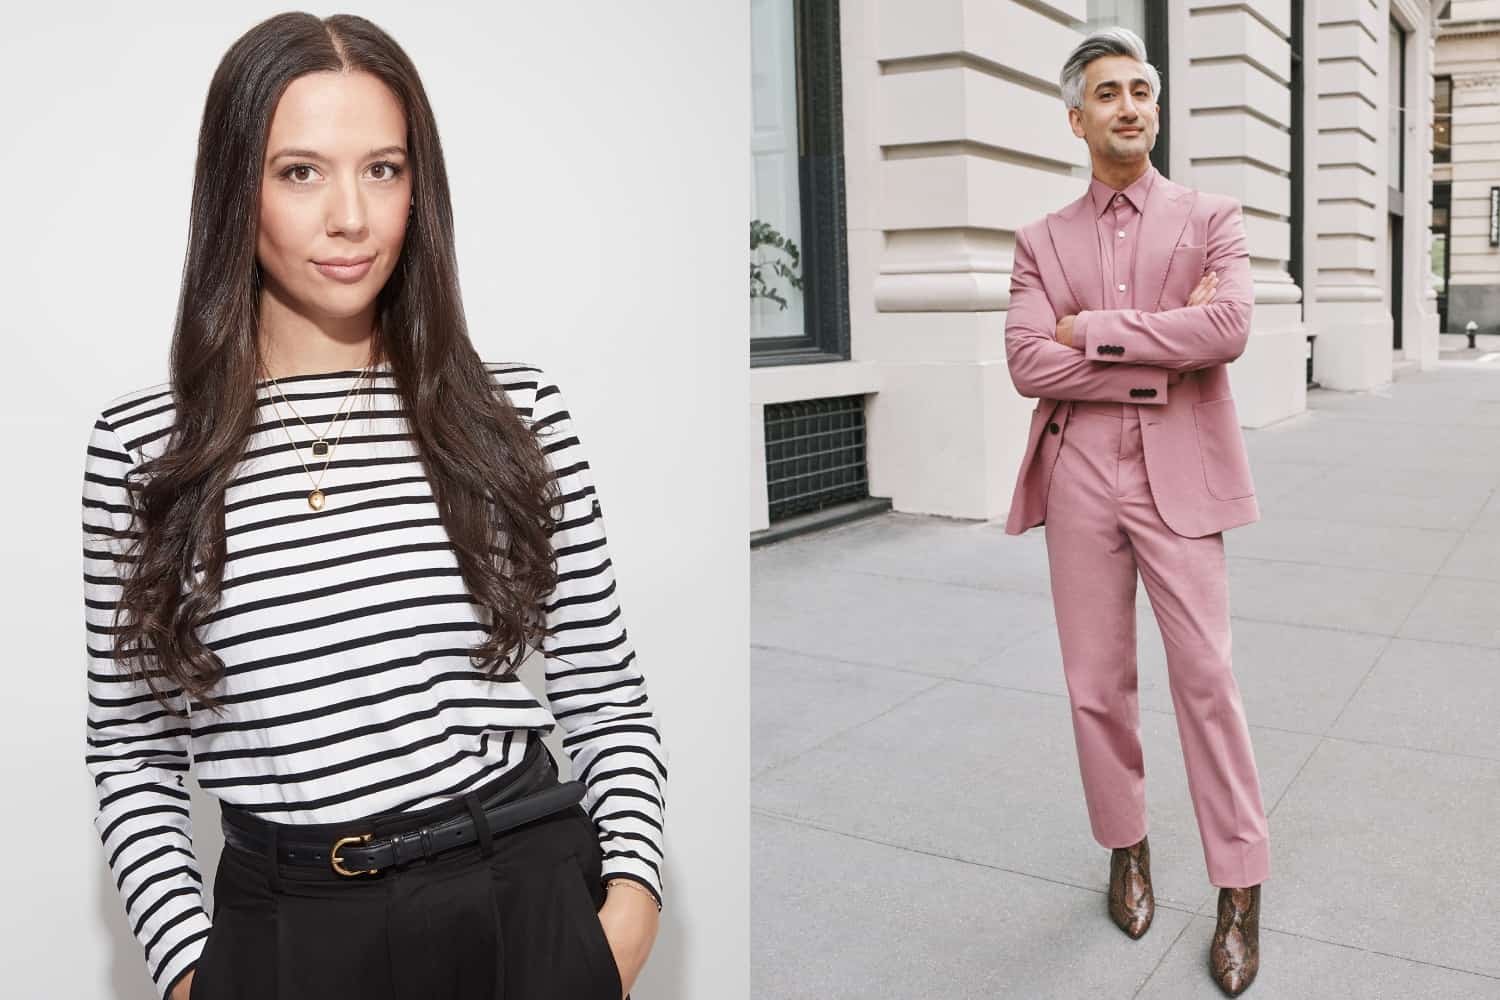 A Harper’s Bazaar Promotion, Tan France’s New Gig, Plus! Vestiaire Collective Adds To Leadership Team